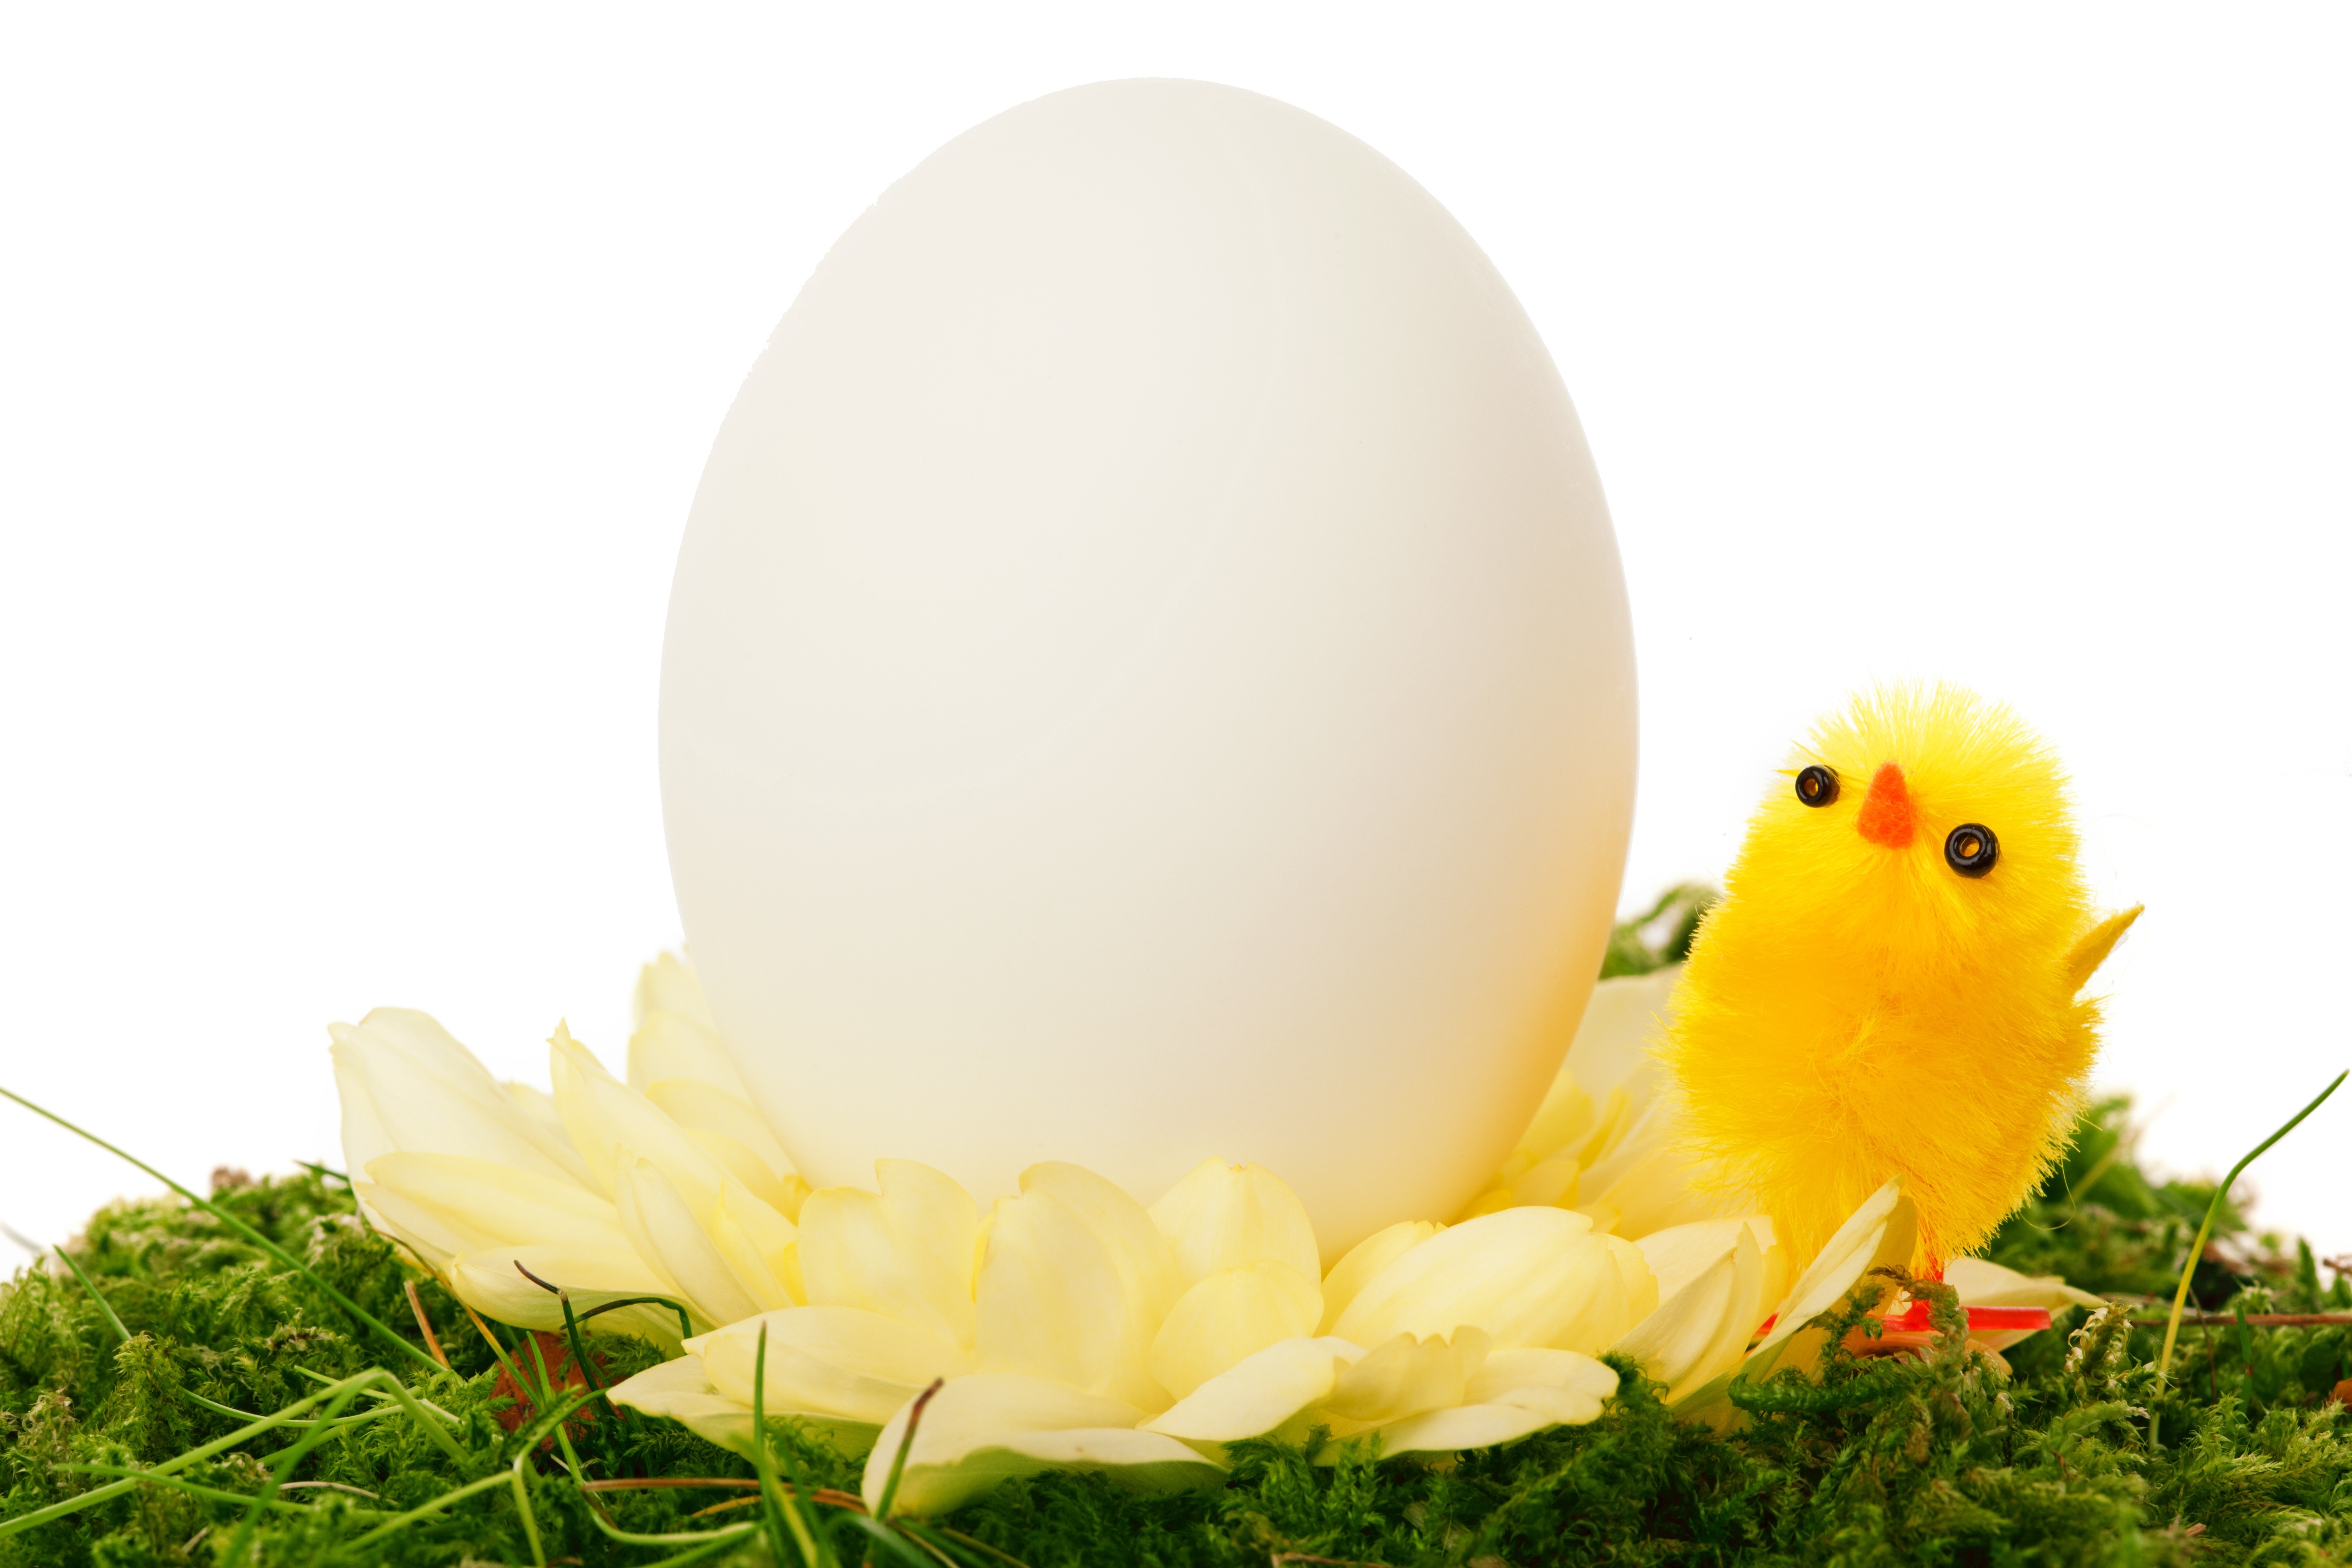 yellow chick and white egg